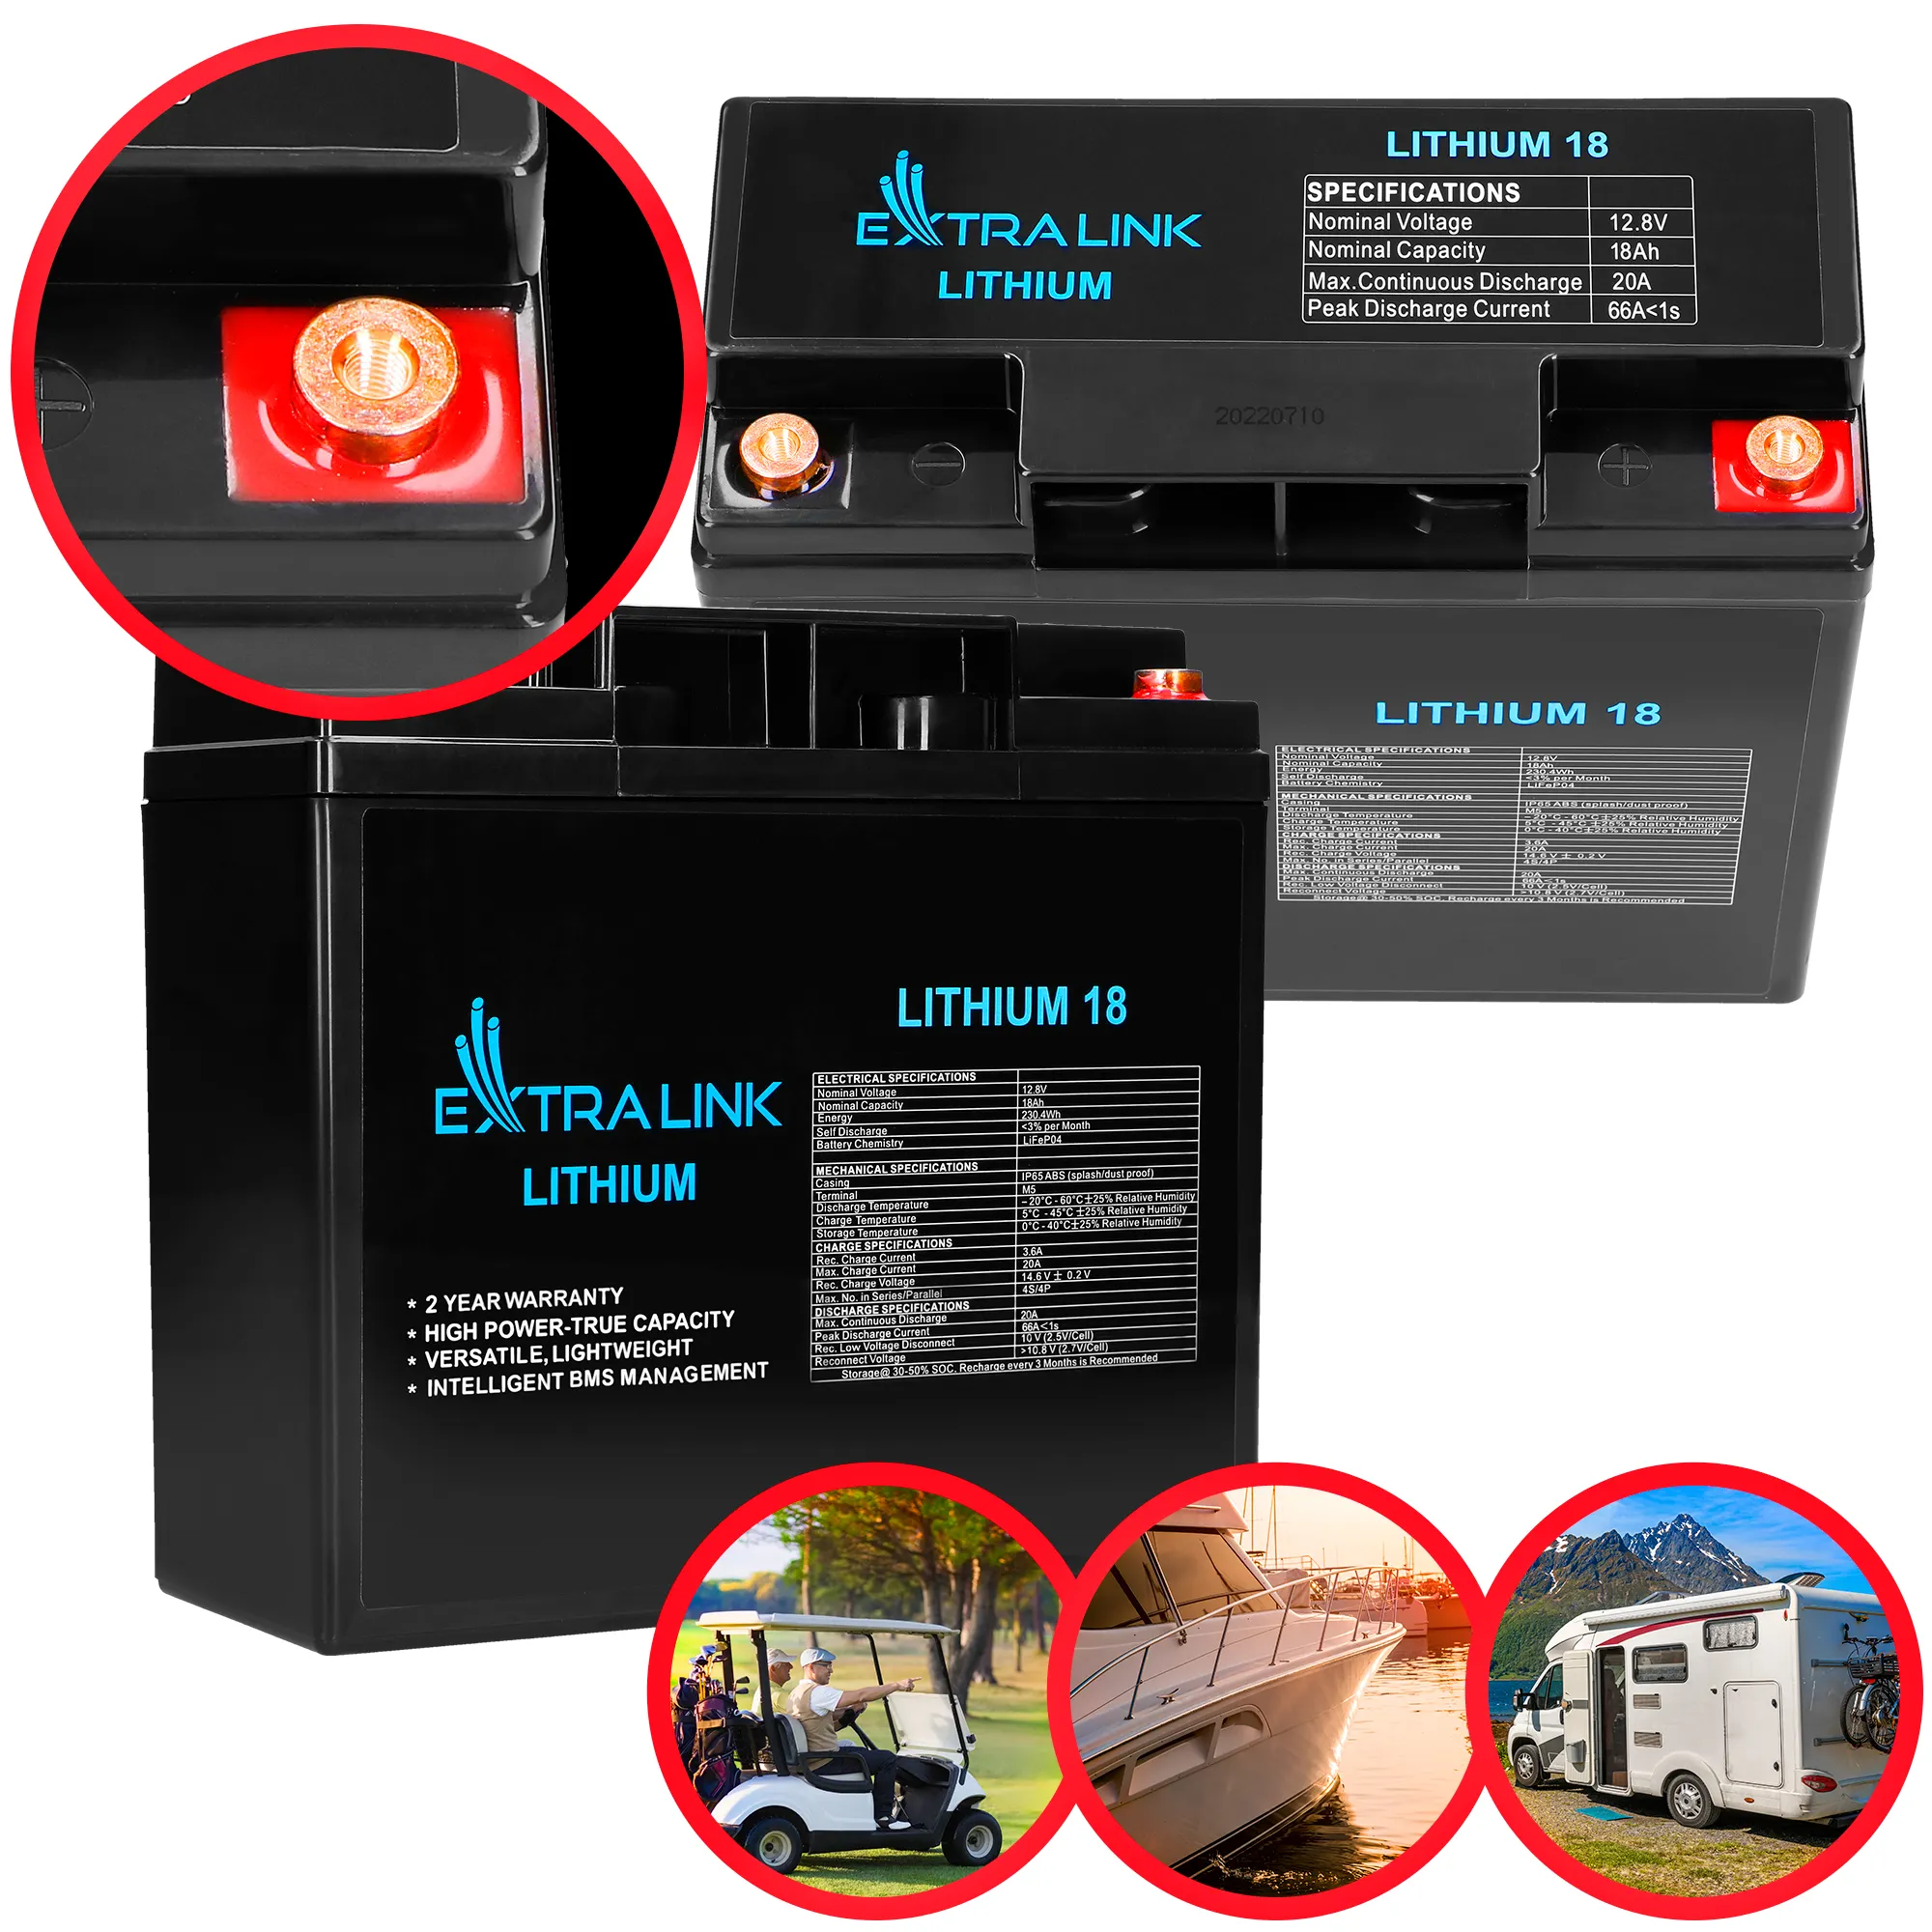 Extralink LiFePO4 18AH Accumulator 12V BMS LiFePO4 battery LiFePO4 type battery with a large number of duty cycles